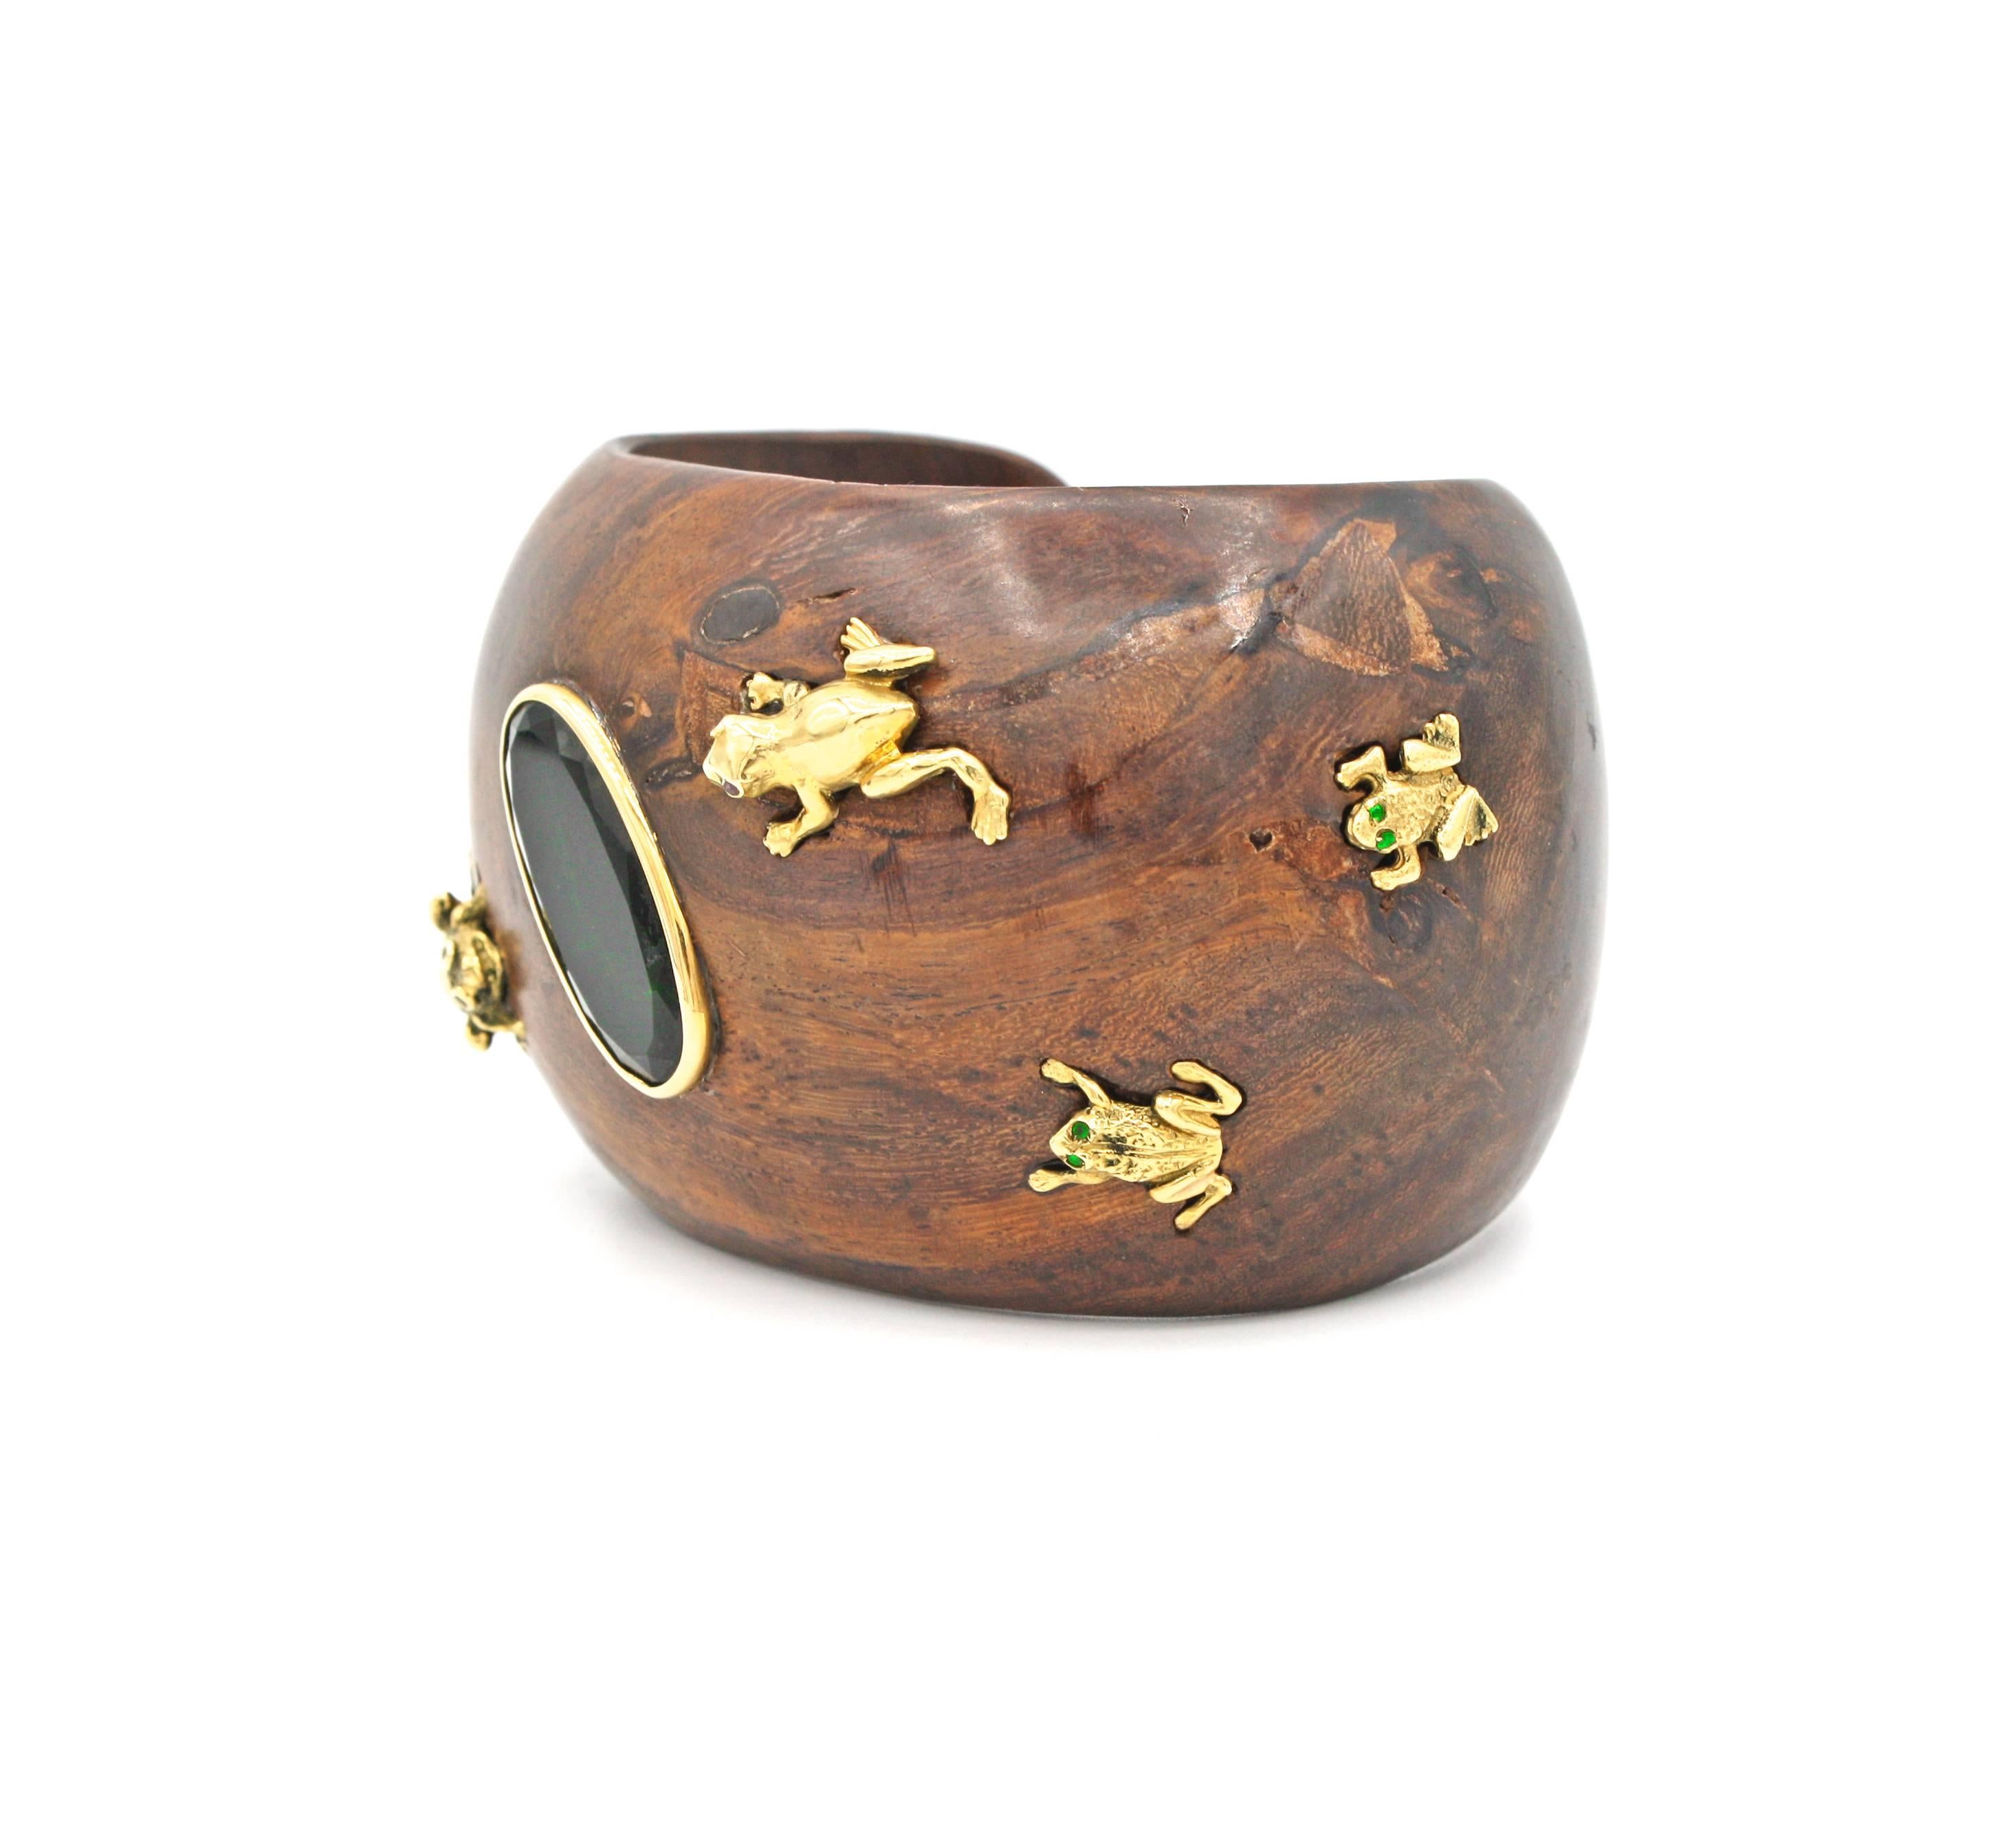 Rich cuff Bracelet of Yellow wood set with a oval cut green topaz and various 18k gold frogs and ladybug which have details of emeralds, rubies and black diamonds.  All the gold elements and stone are set into the wood, giving the cuff